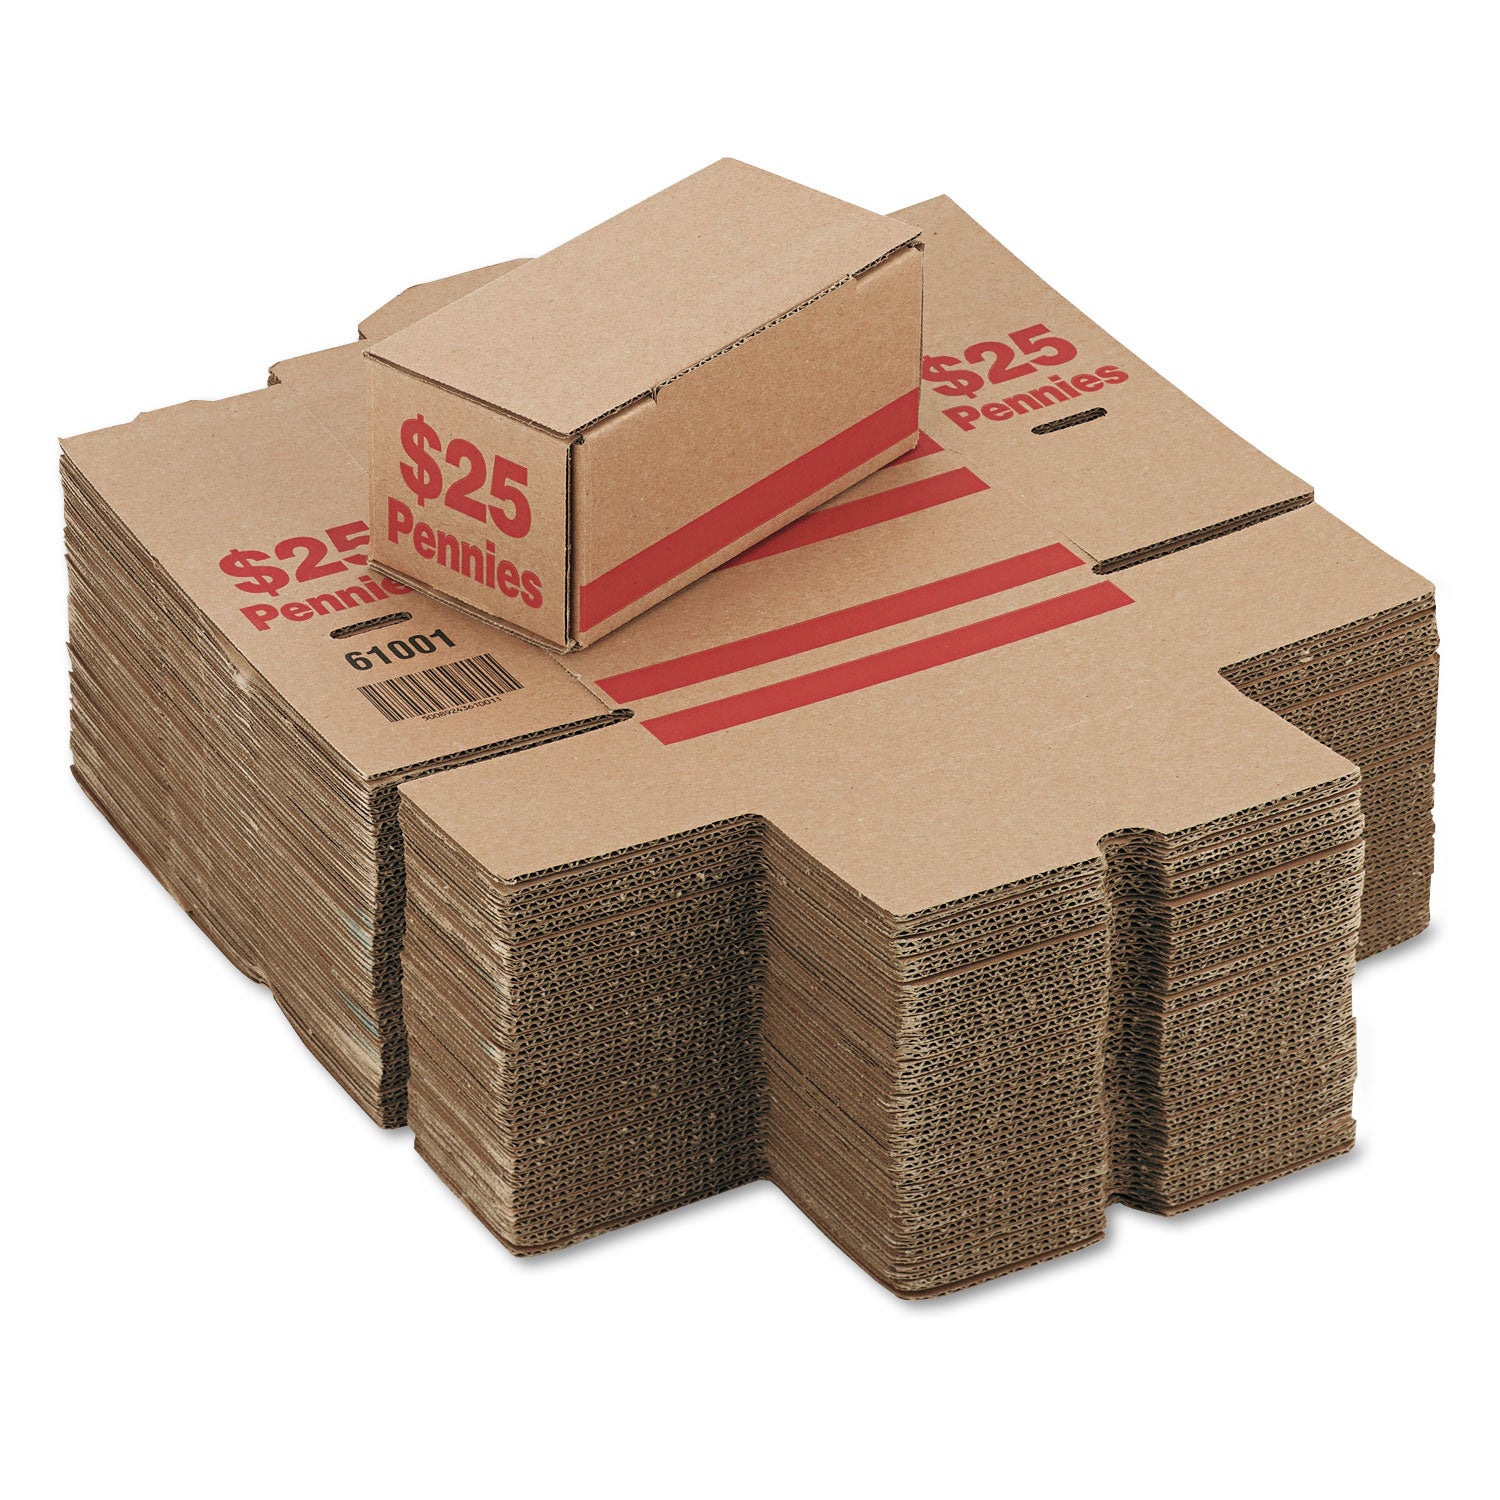 corrugated-cardboard-coin-storage-with-denomination-printed-on-side-85-x-438-x-363-red_icx94190086 - 2